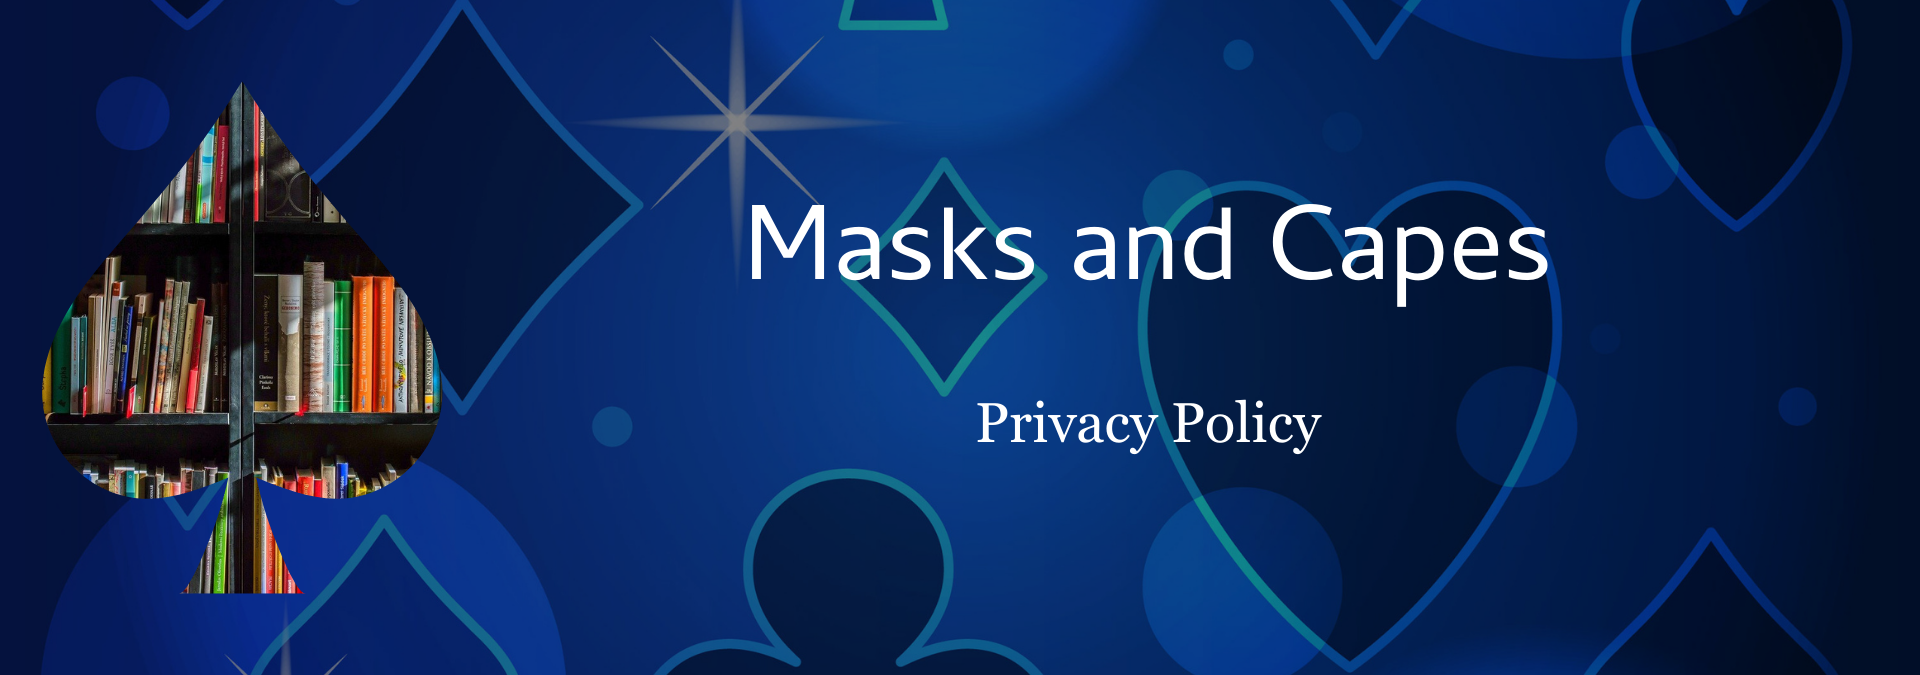 Masks and Capes: Privacy Policy